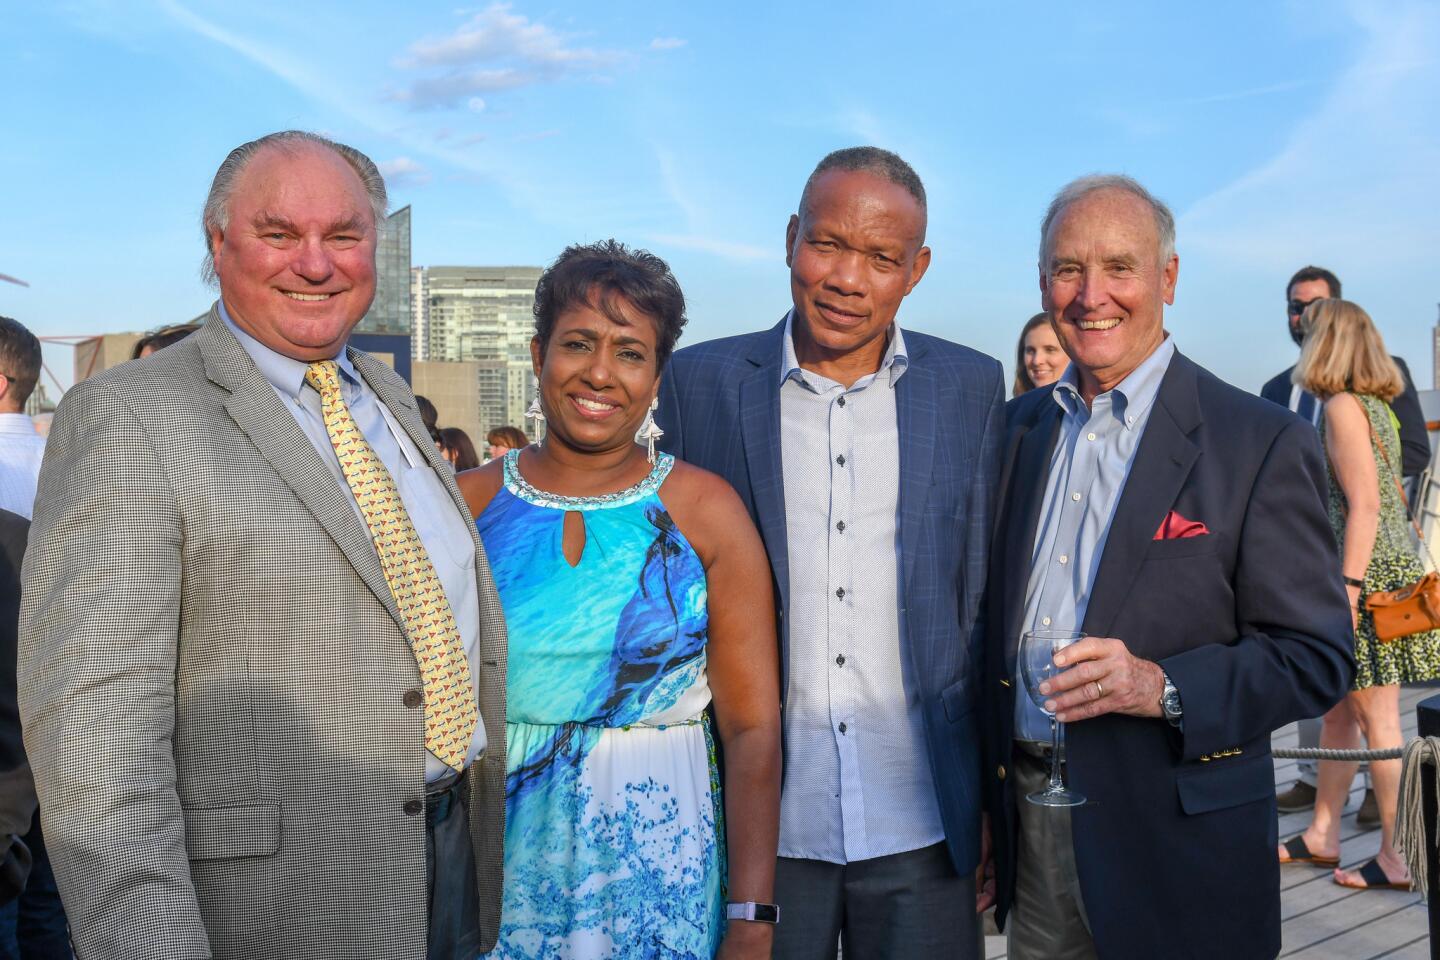 Tom Forcosky, Sheila James, Ian James and David Beck attended Historic Ships' Captain's Jubilee on board the USS Constellation.